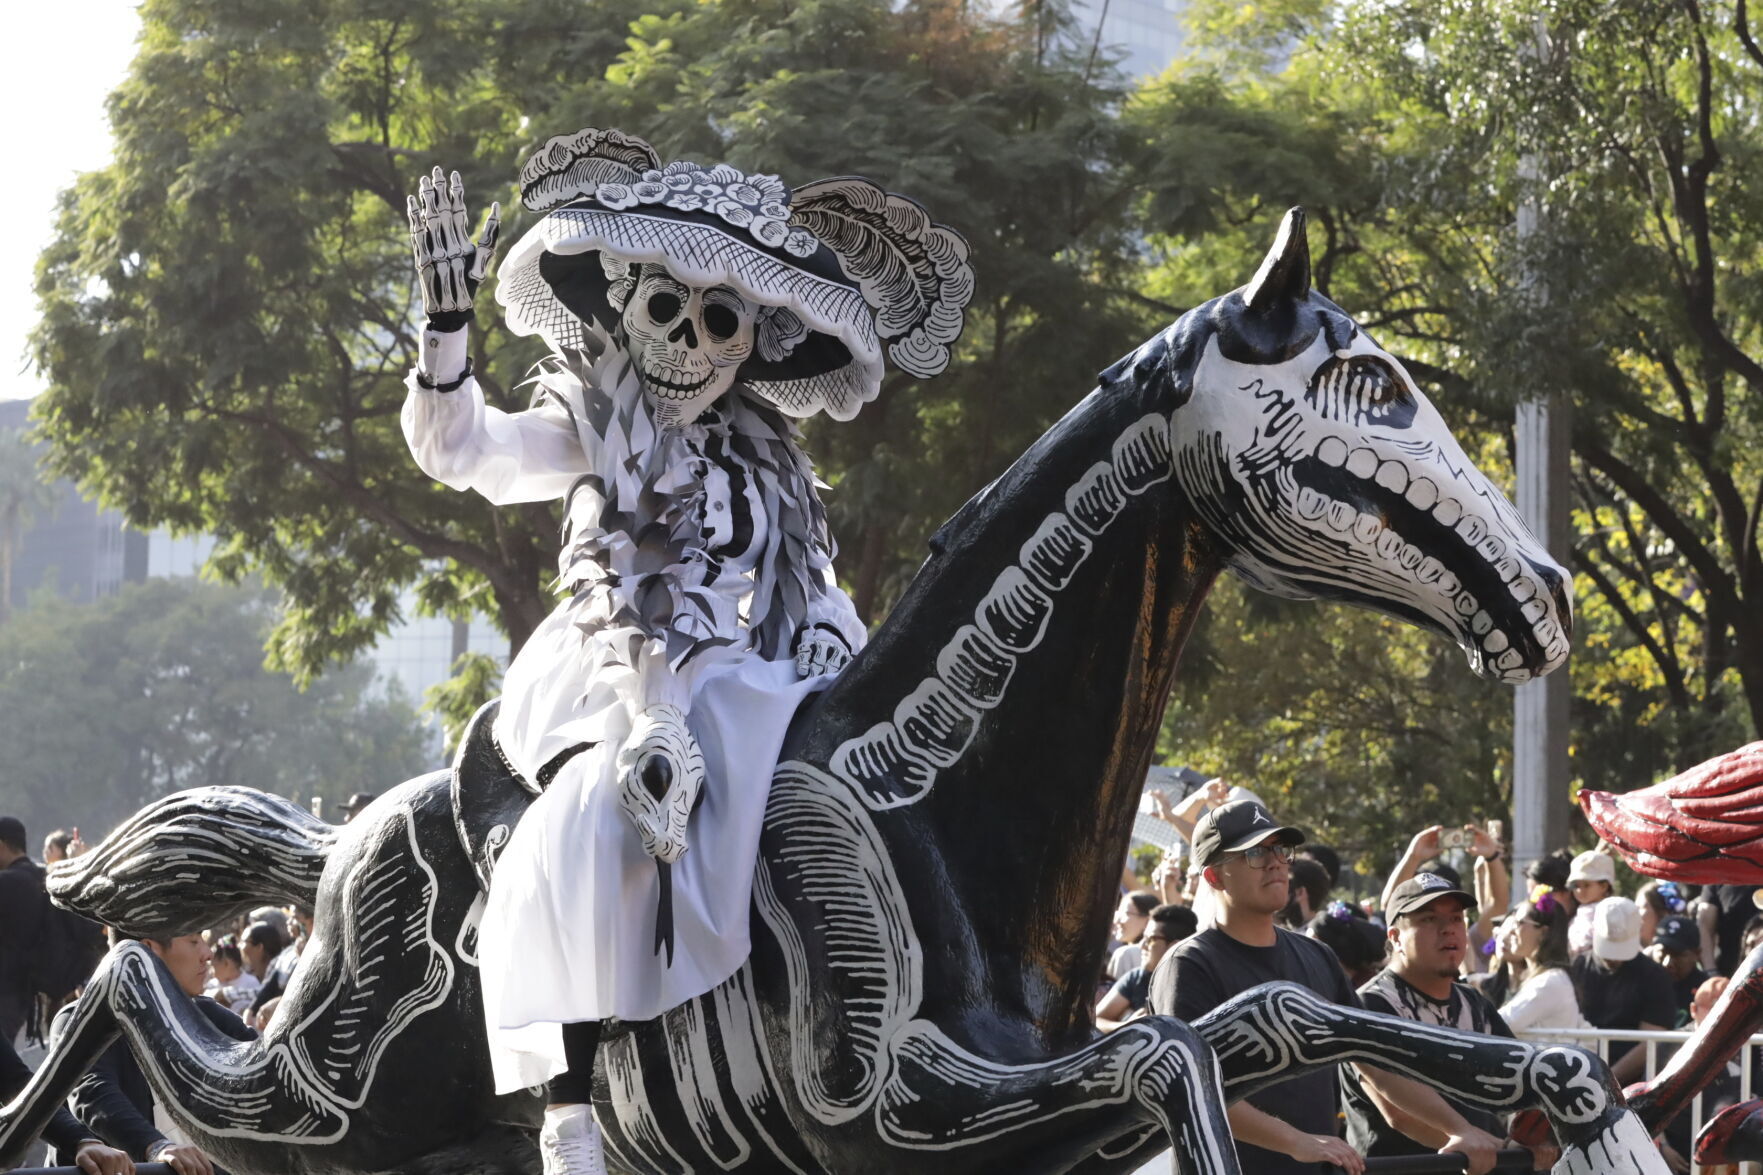 Skeleton marching bands and dancers in butterfly skirts join in Mexico City’s Day of the Dead parade